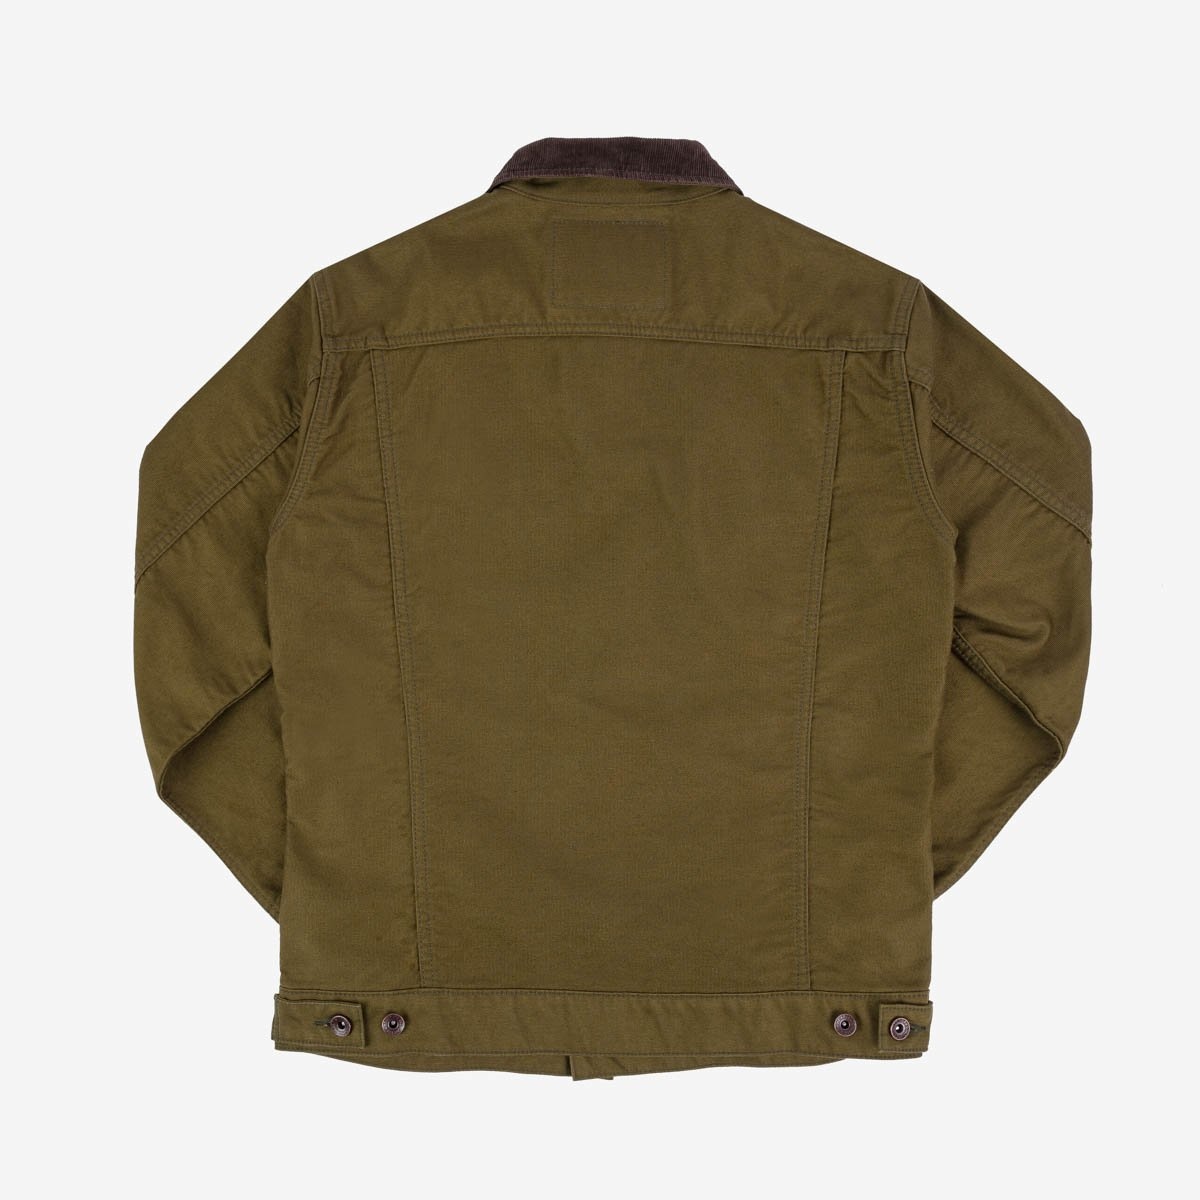 IH-526-ODG 12oz Whipcord Modified Type III Jacket - Olive Drab Green - 6